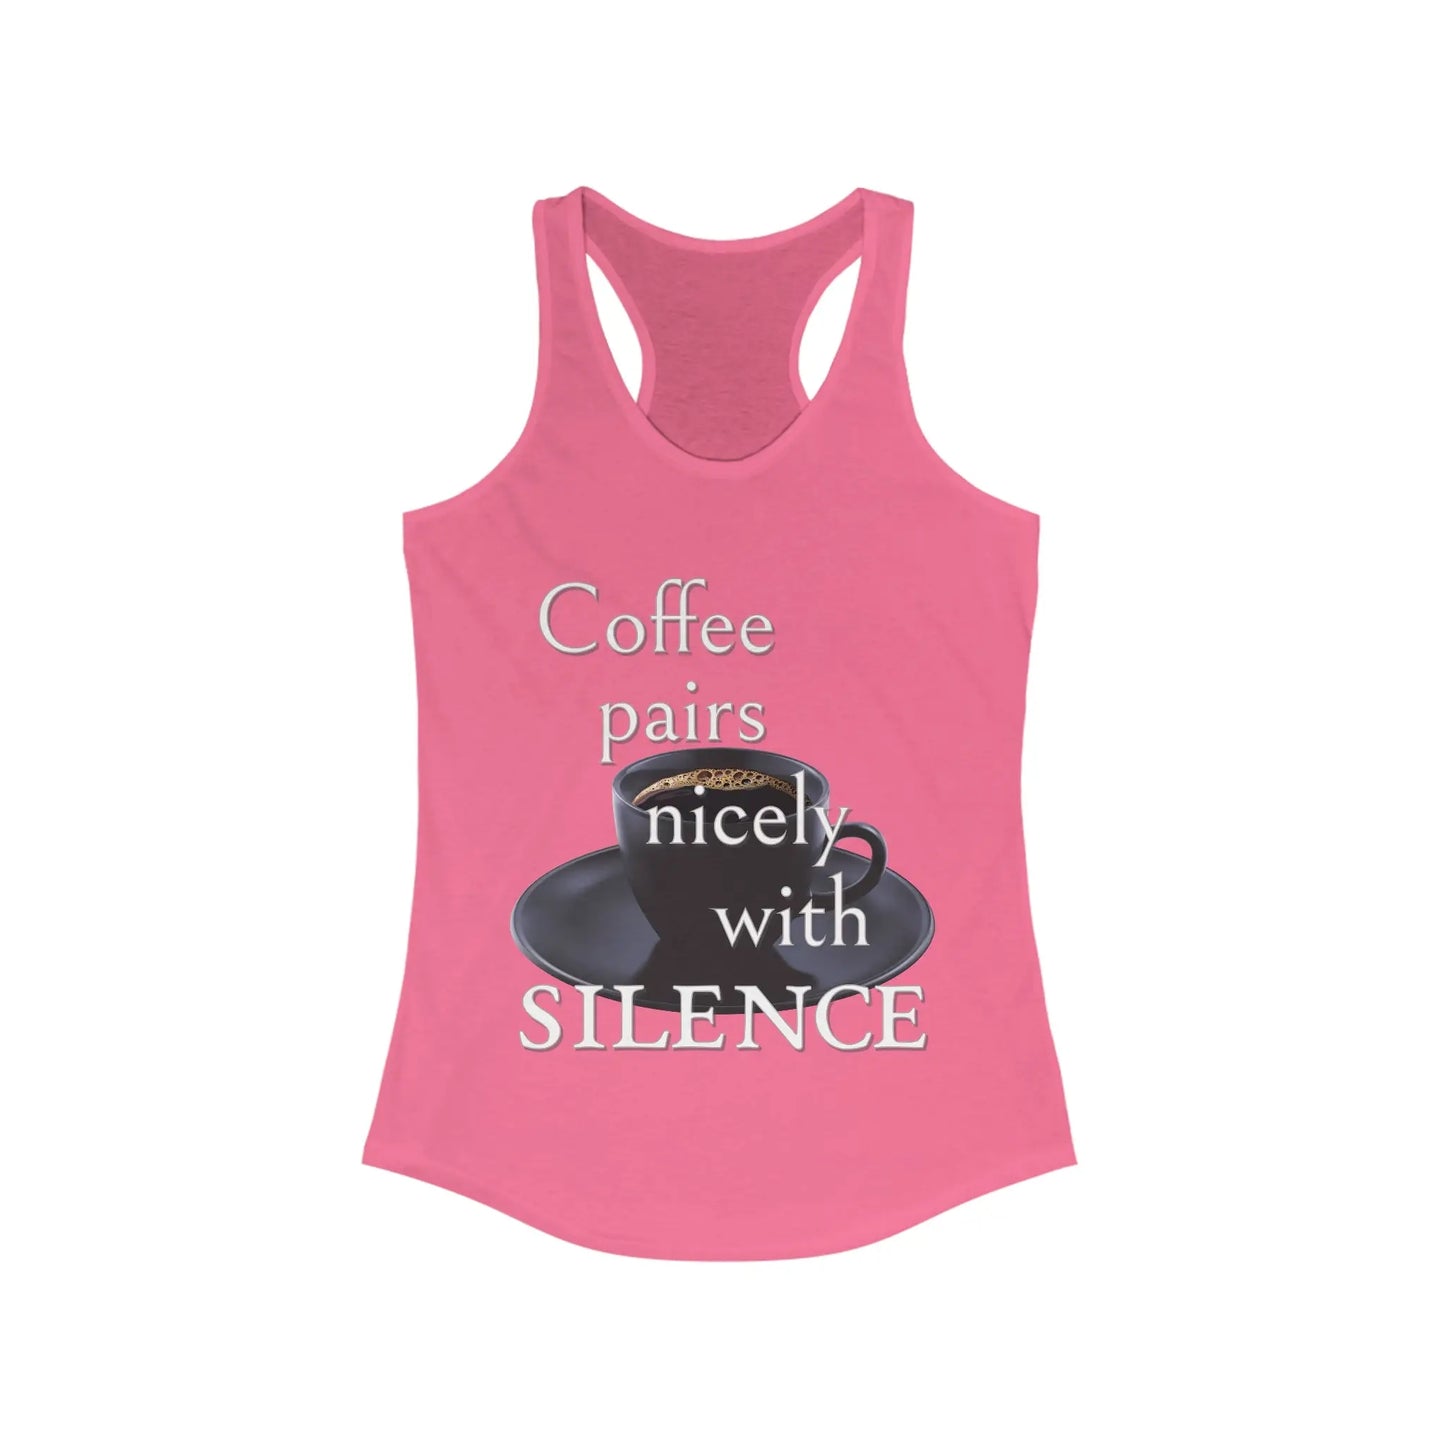 Coffee Pairs Nicely With Silence Women's Tank - Wicked Tees